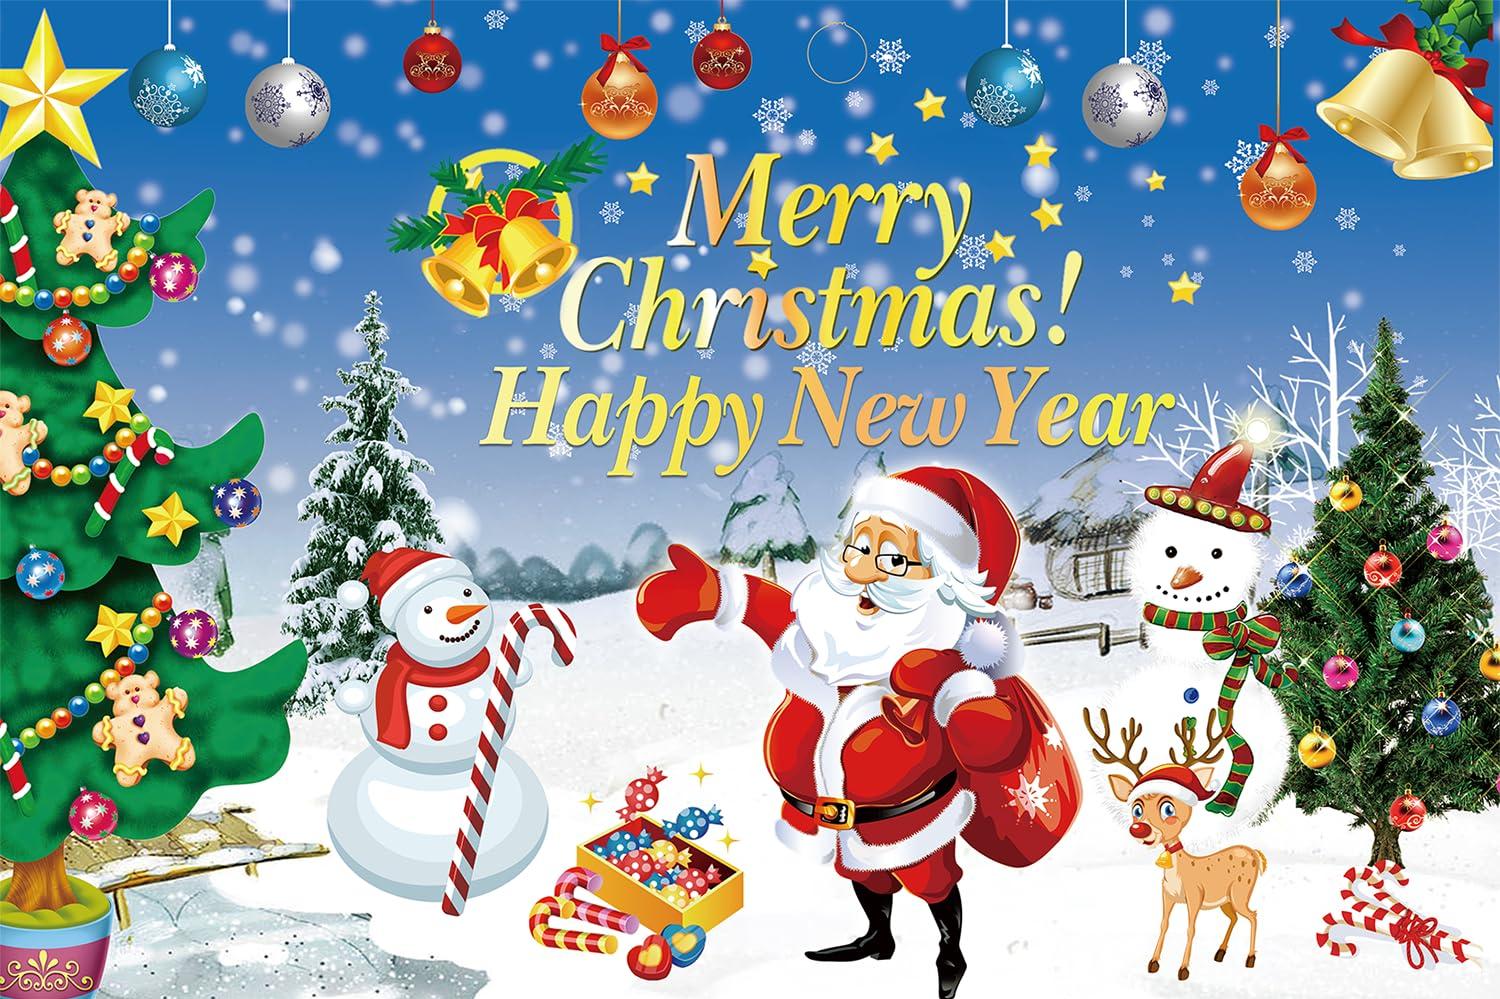 Amazoncom YinQin 180x120 cm Merry Christmas Party Backdrops